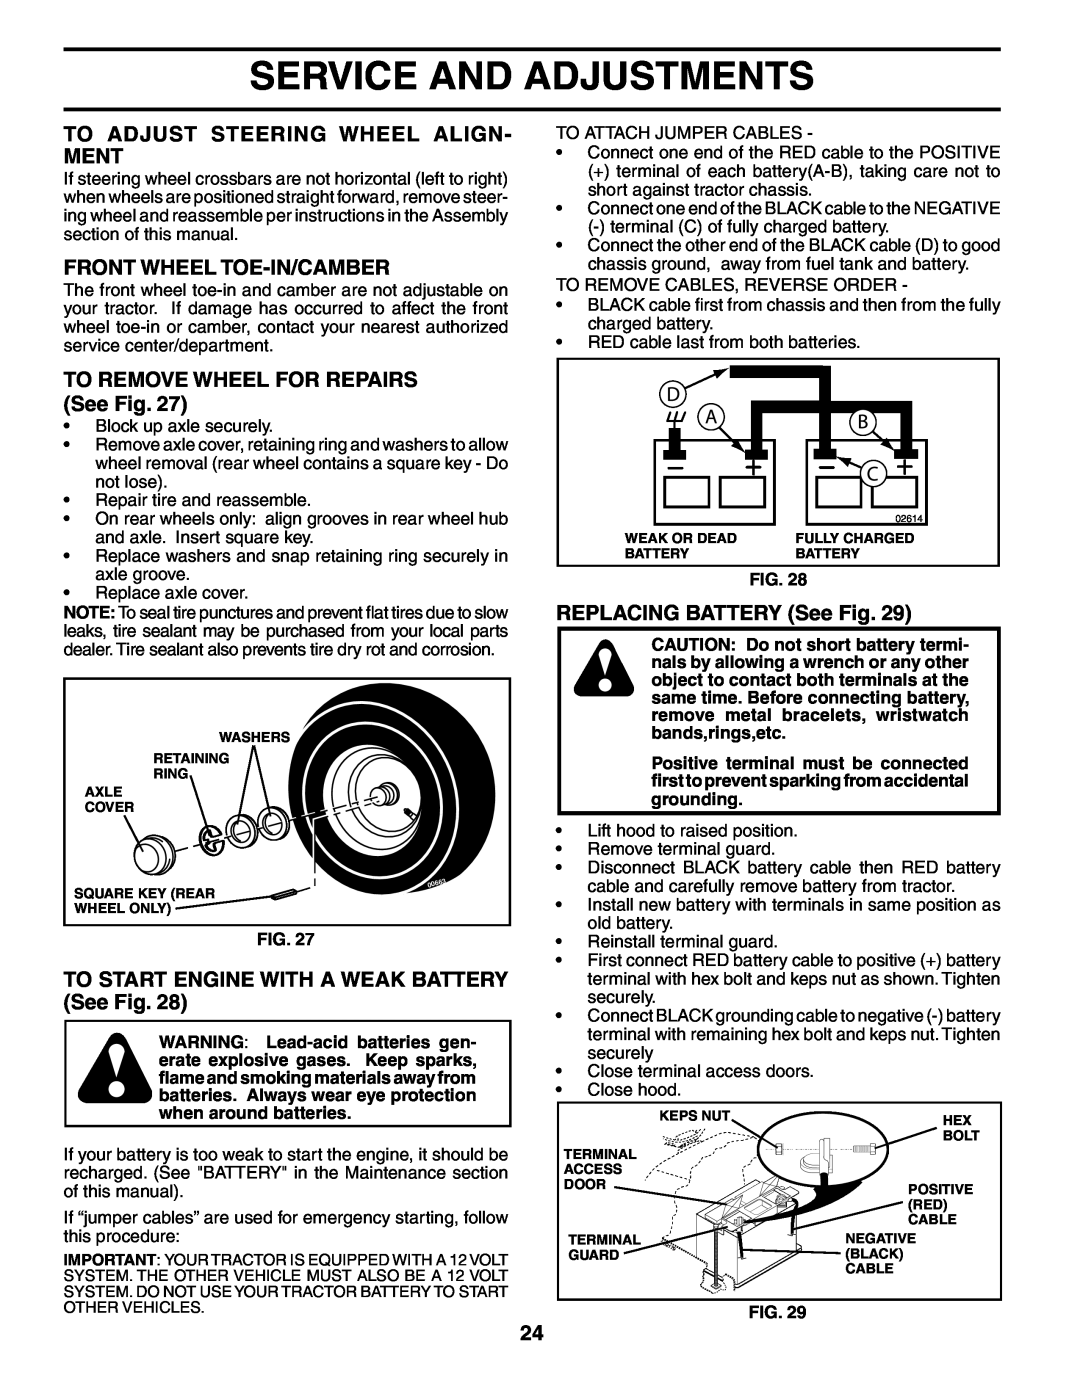 Poulan PD25PH48STD To Adjust Steering Wheel Align- Ment, Front Wheel Toe-In/Camber, TO REMOVE WHEEL FOR REPAIRS See Fig 